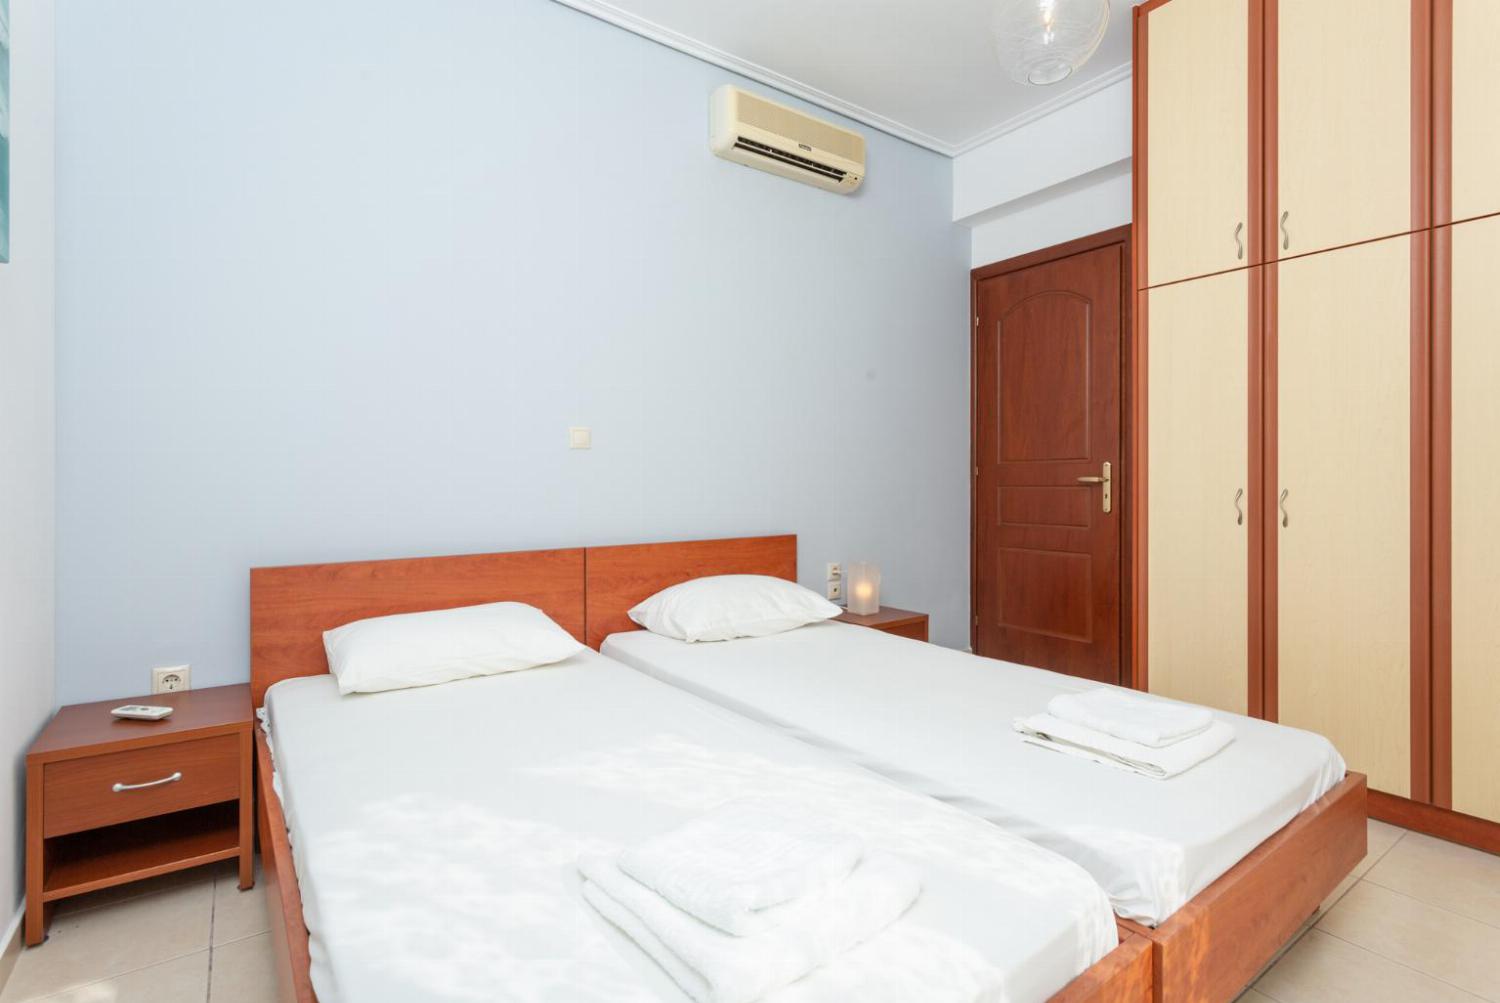 Twin bedroom with A/C and terrace access